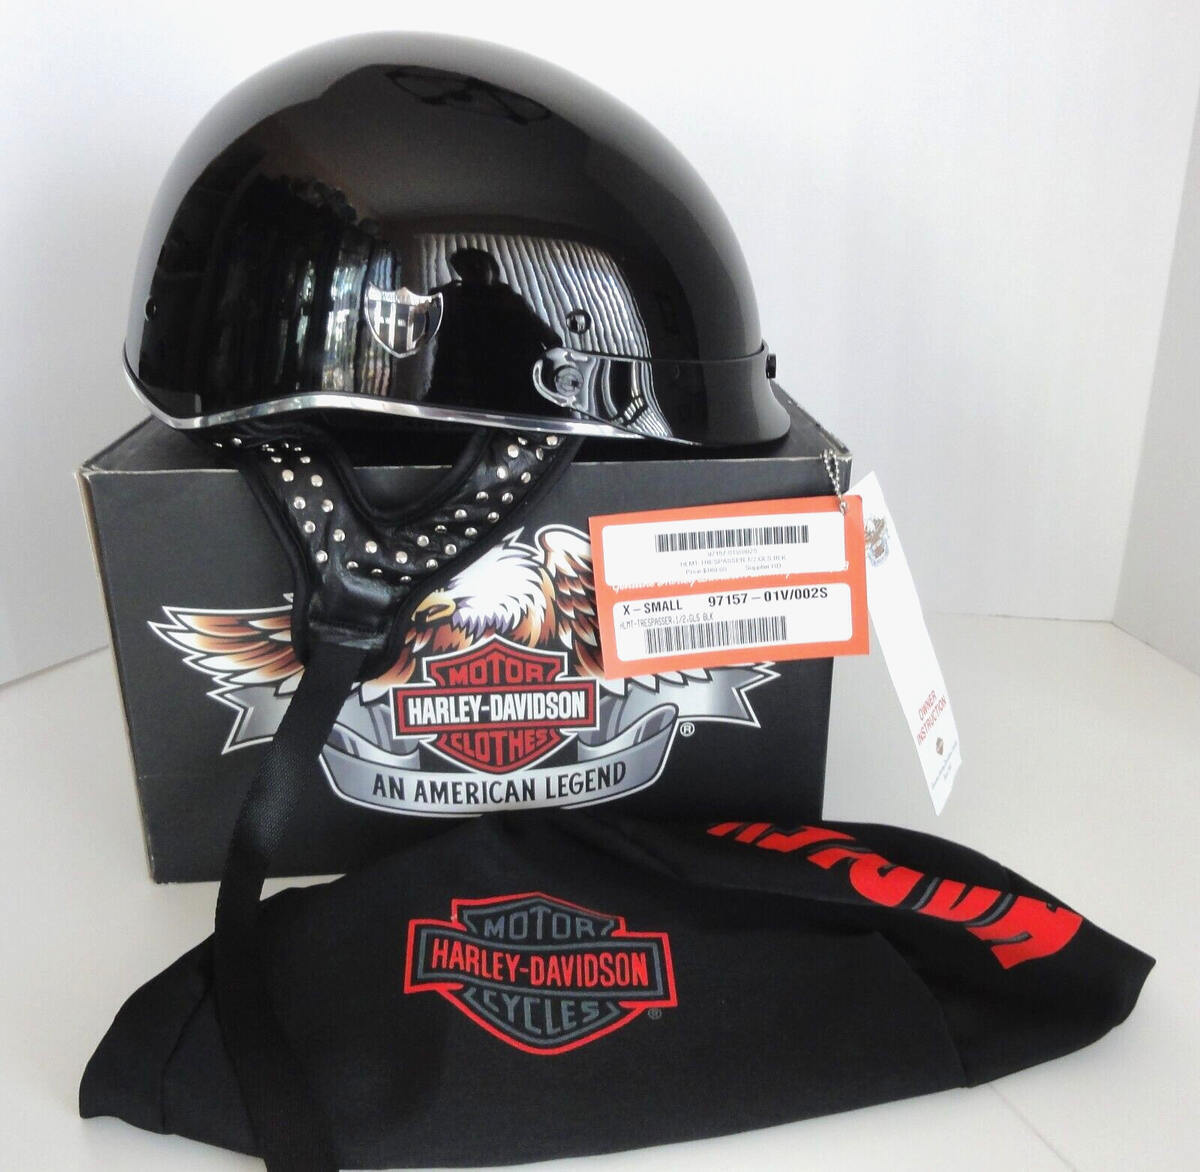 Primary image for Trespasser Harley Davidson Motorcycle Helmet NIB with Tags and HD Bag Vintage